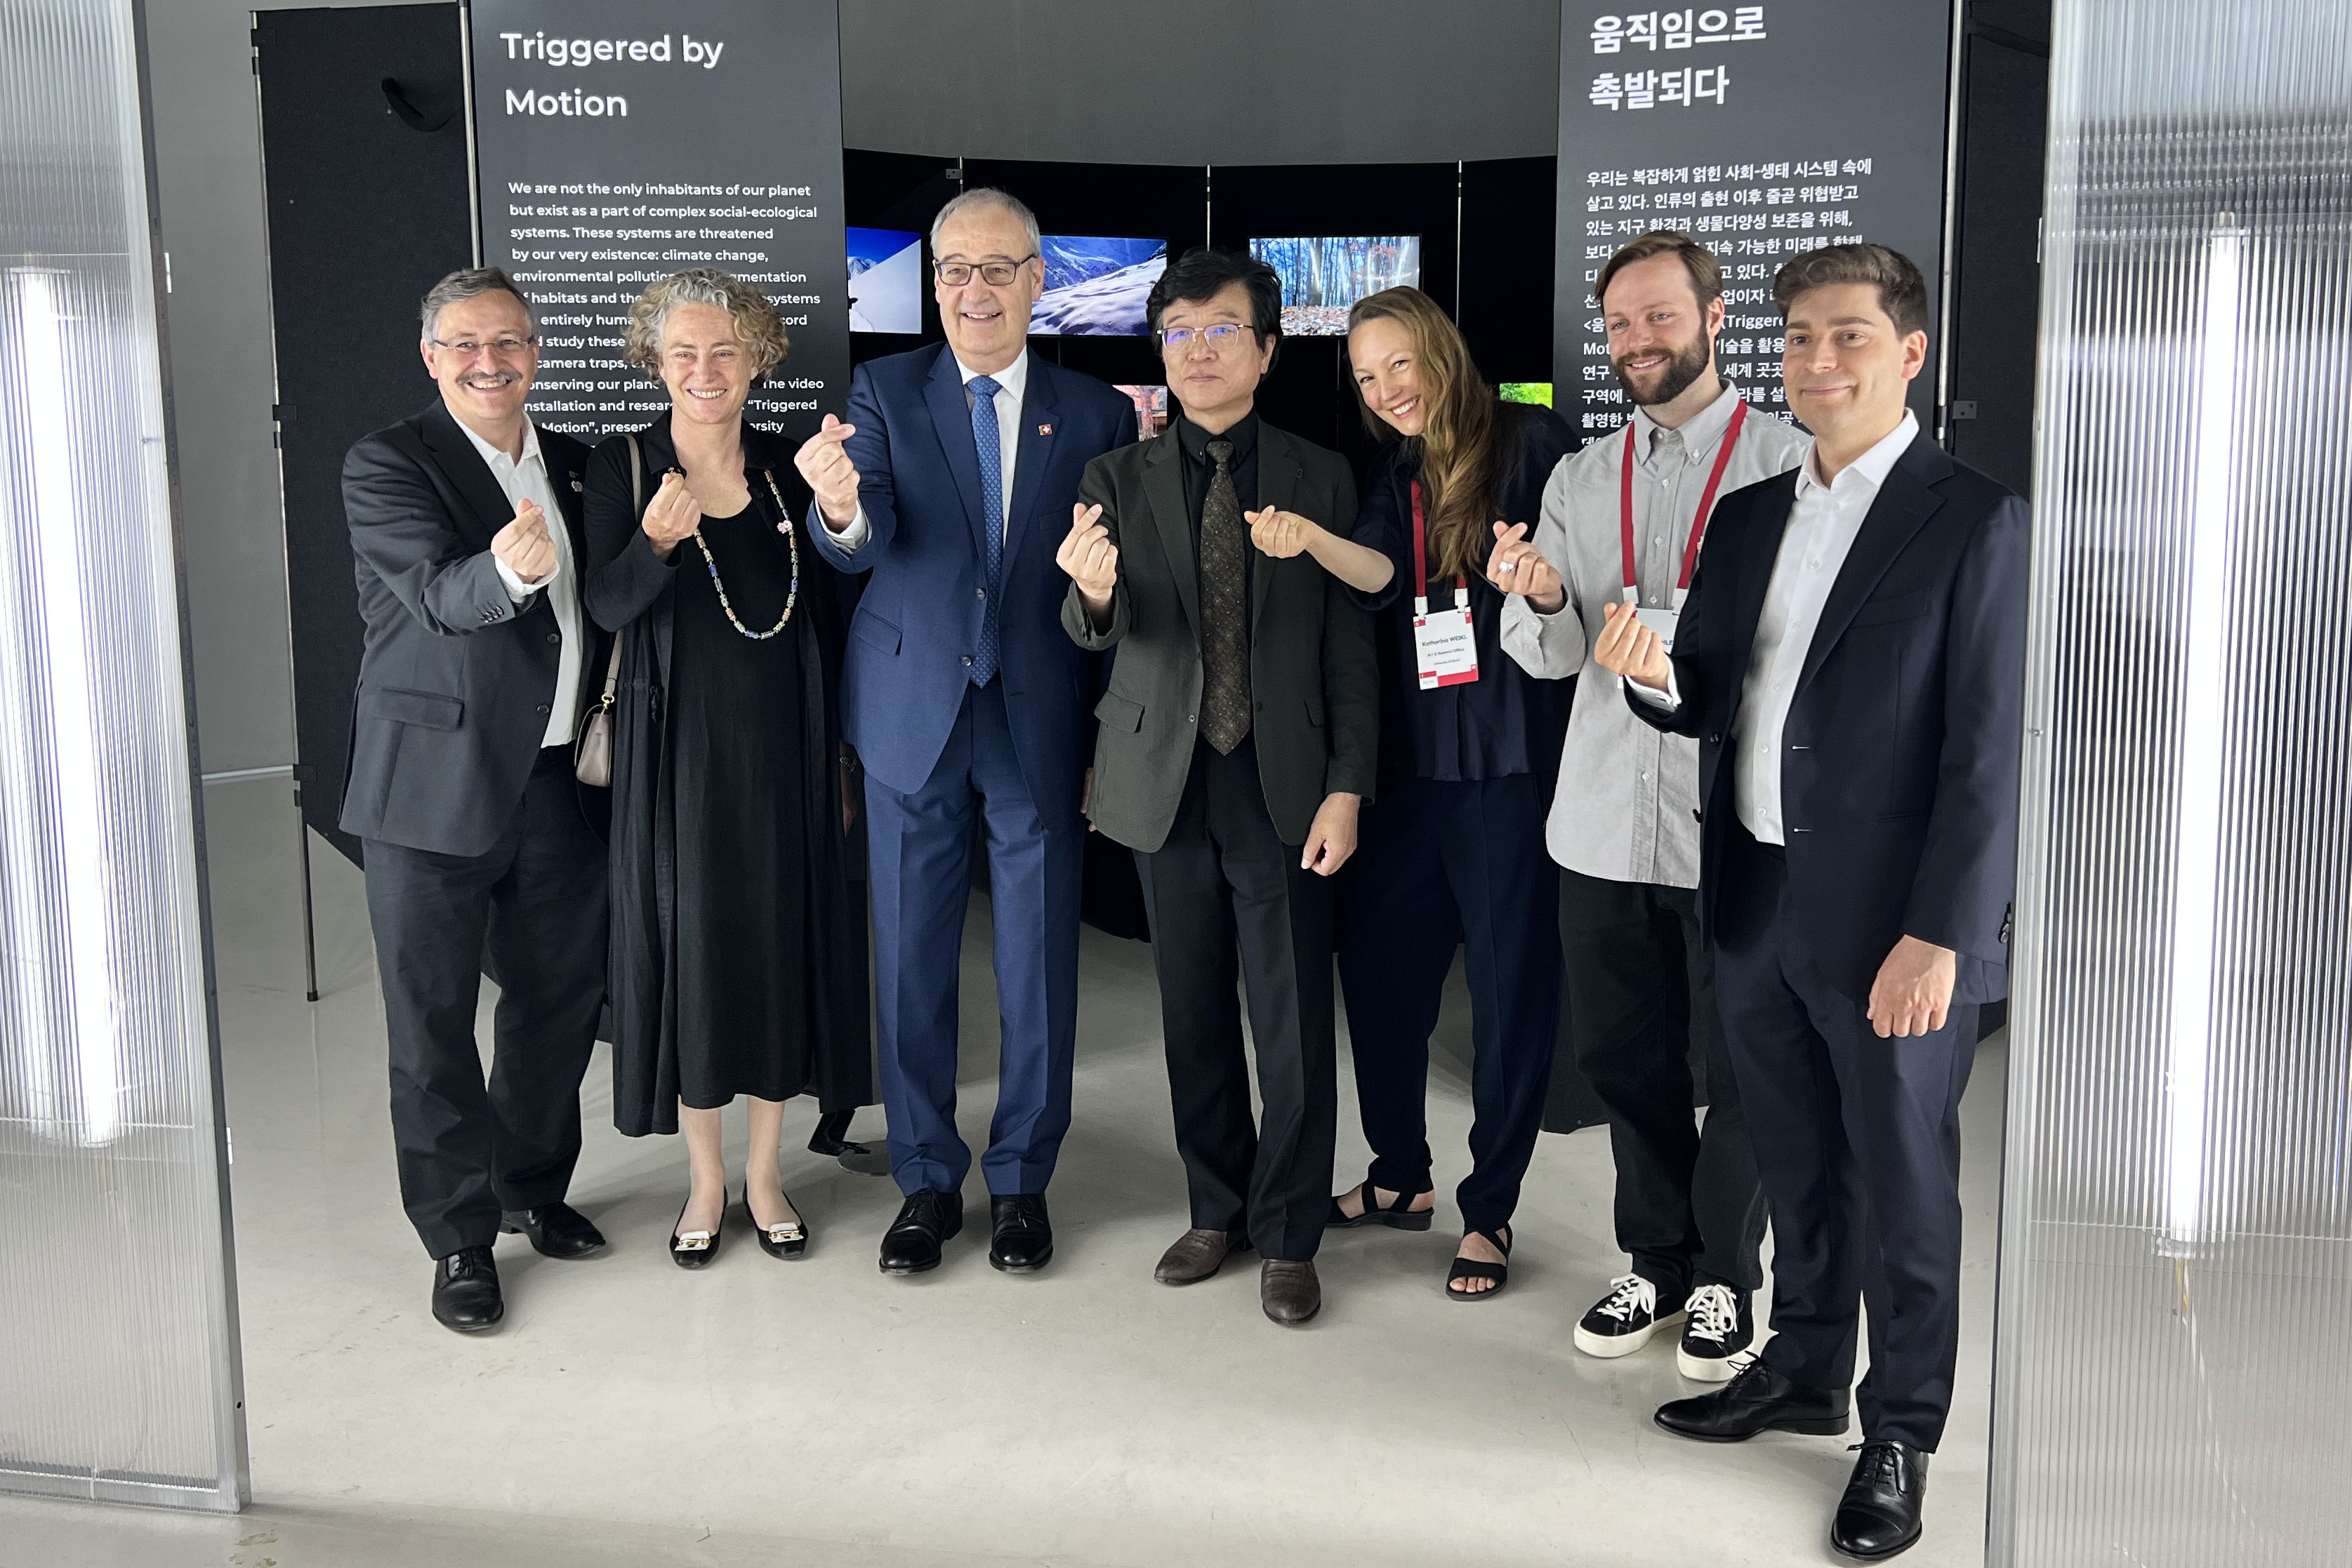 Federal Councillor Guy Parmelin during his visit at the Swiss Korean Innovation Week